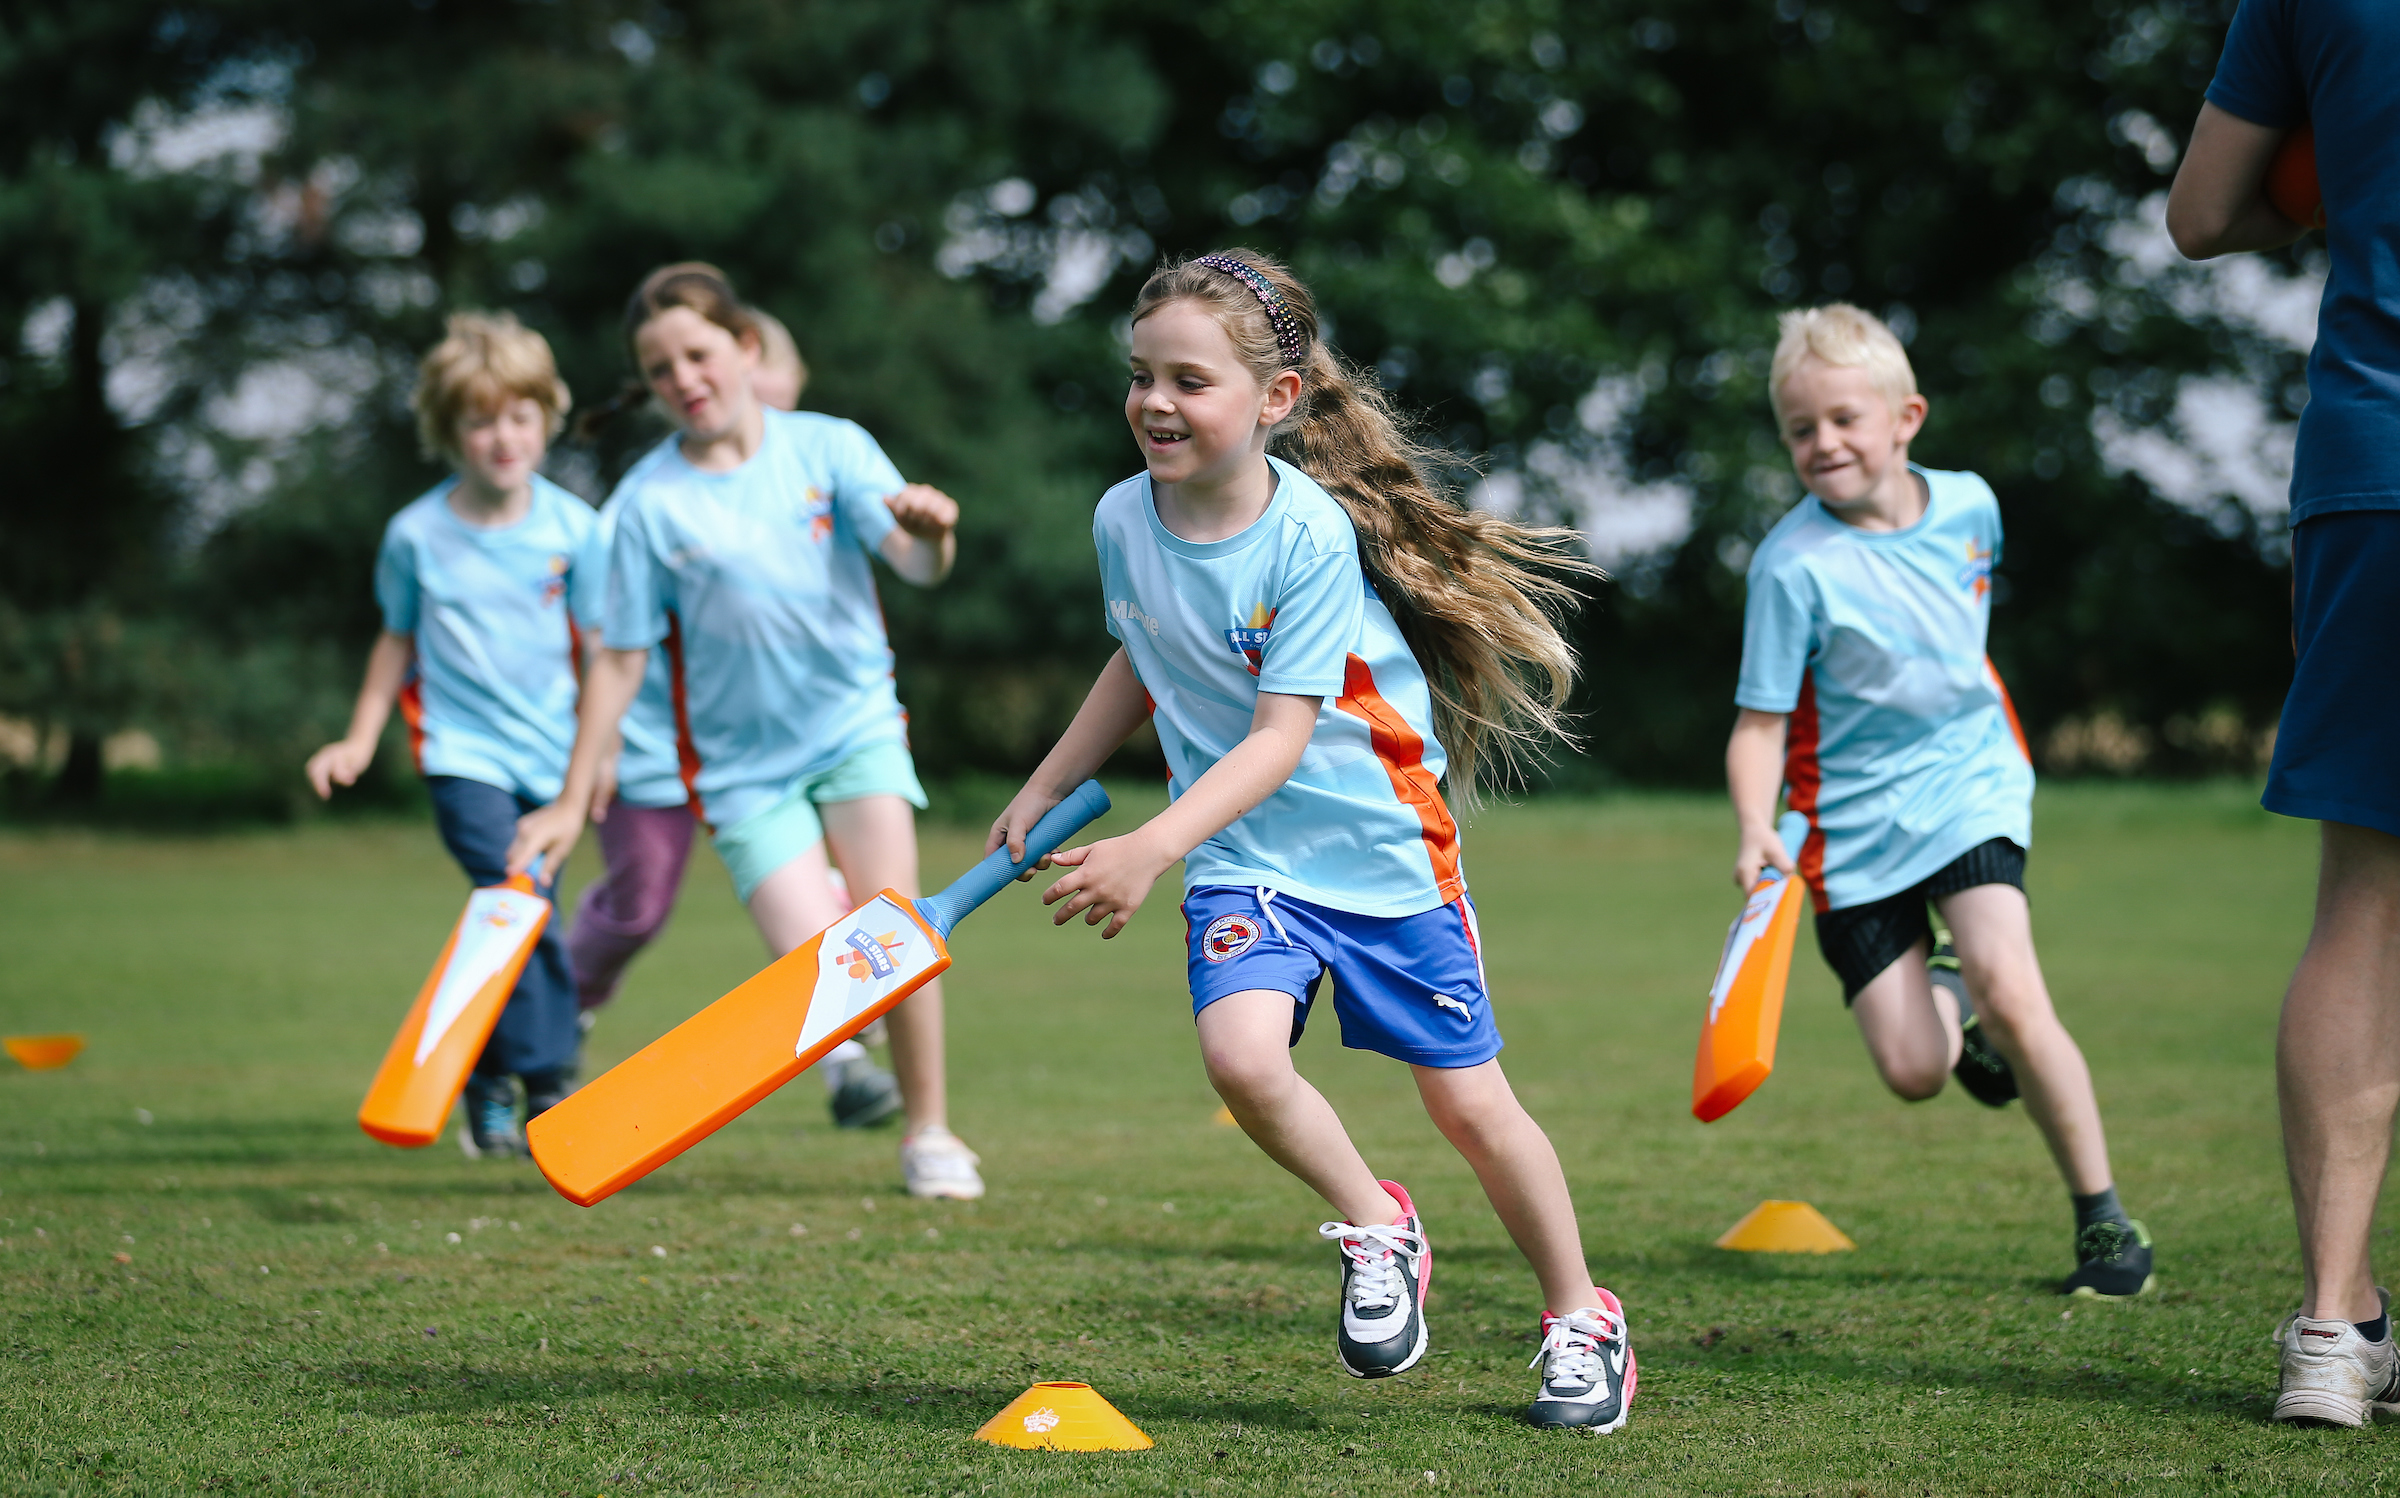 Four young children playing cricket. Wearing blue T shirts